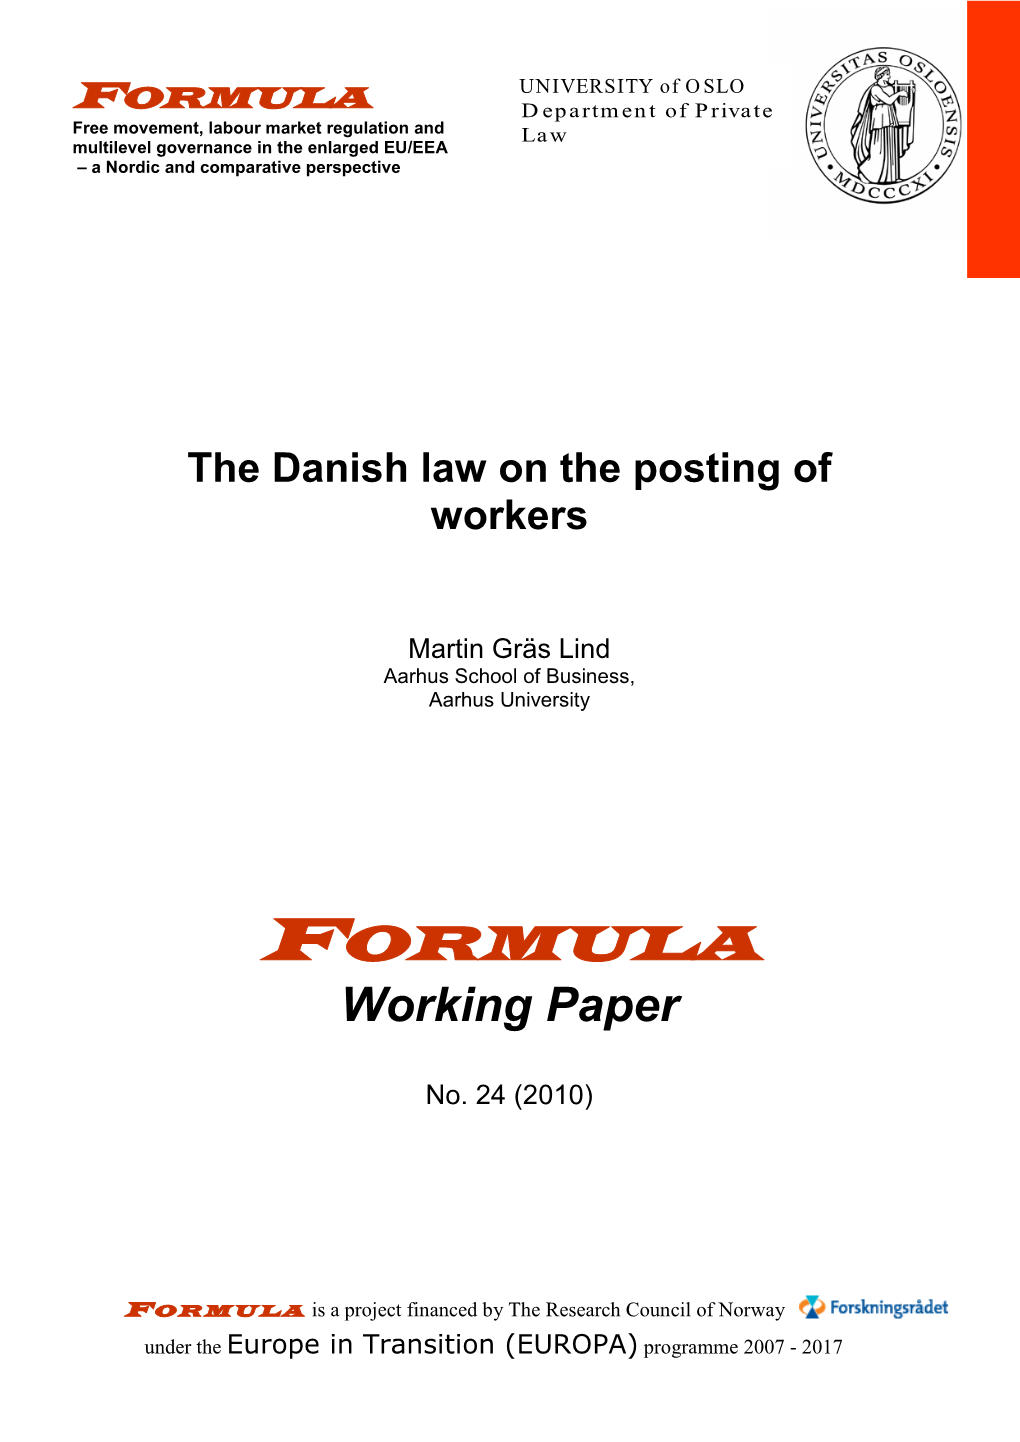 The Danish Law on the Posting of Workers